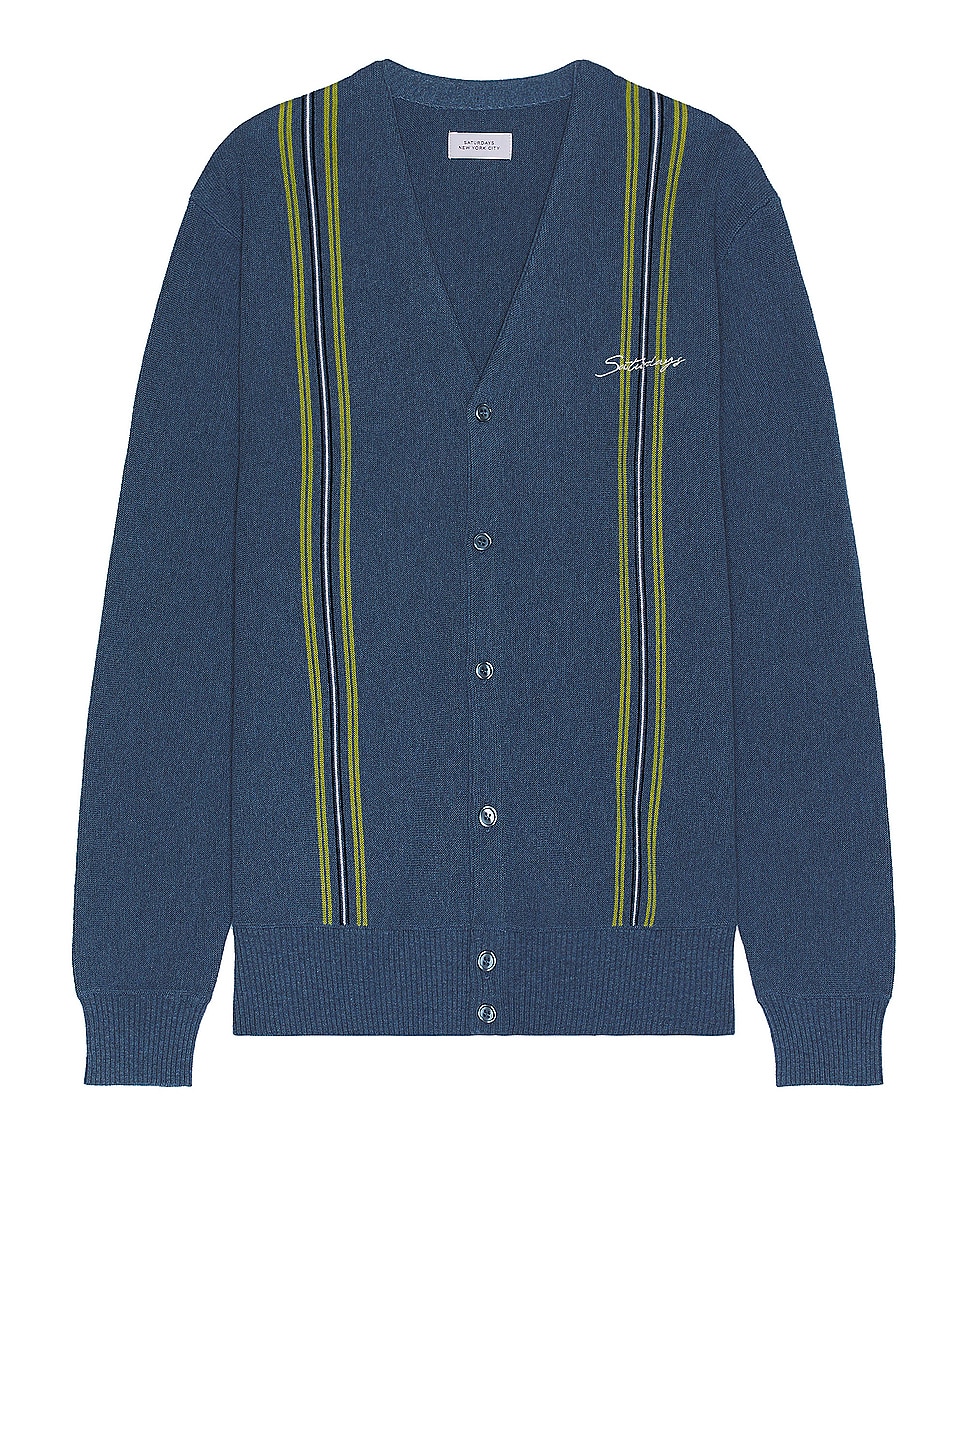 Image 1 of SATURDAYS NYC Michael High Guage Knit Cardigan in Coronet Blue